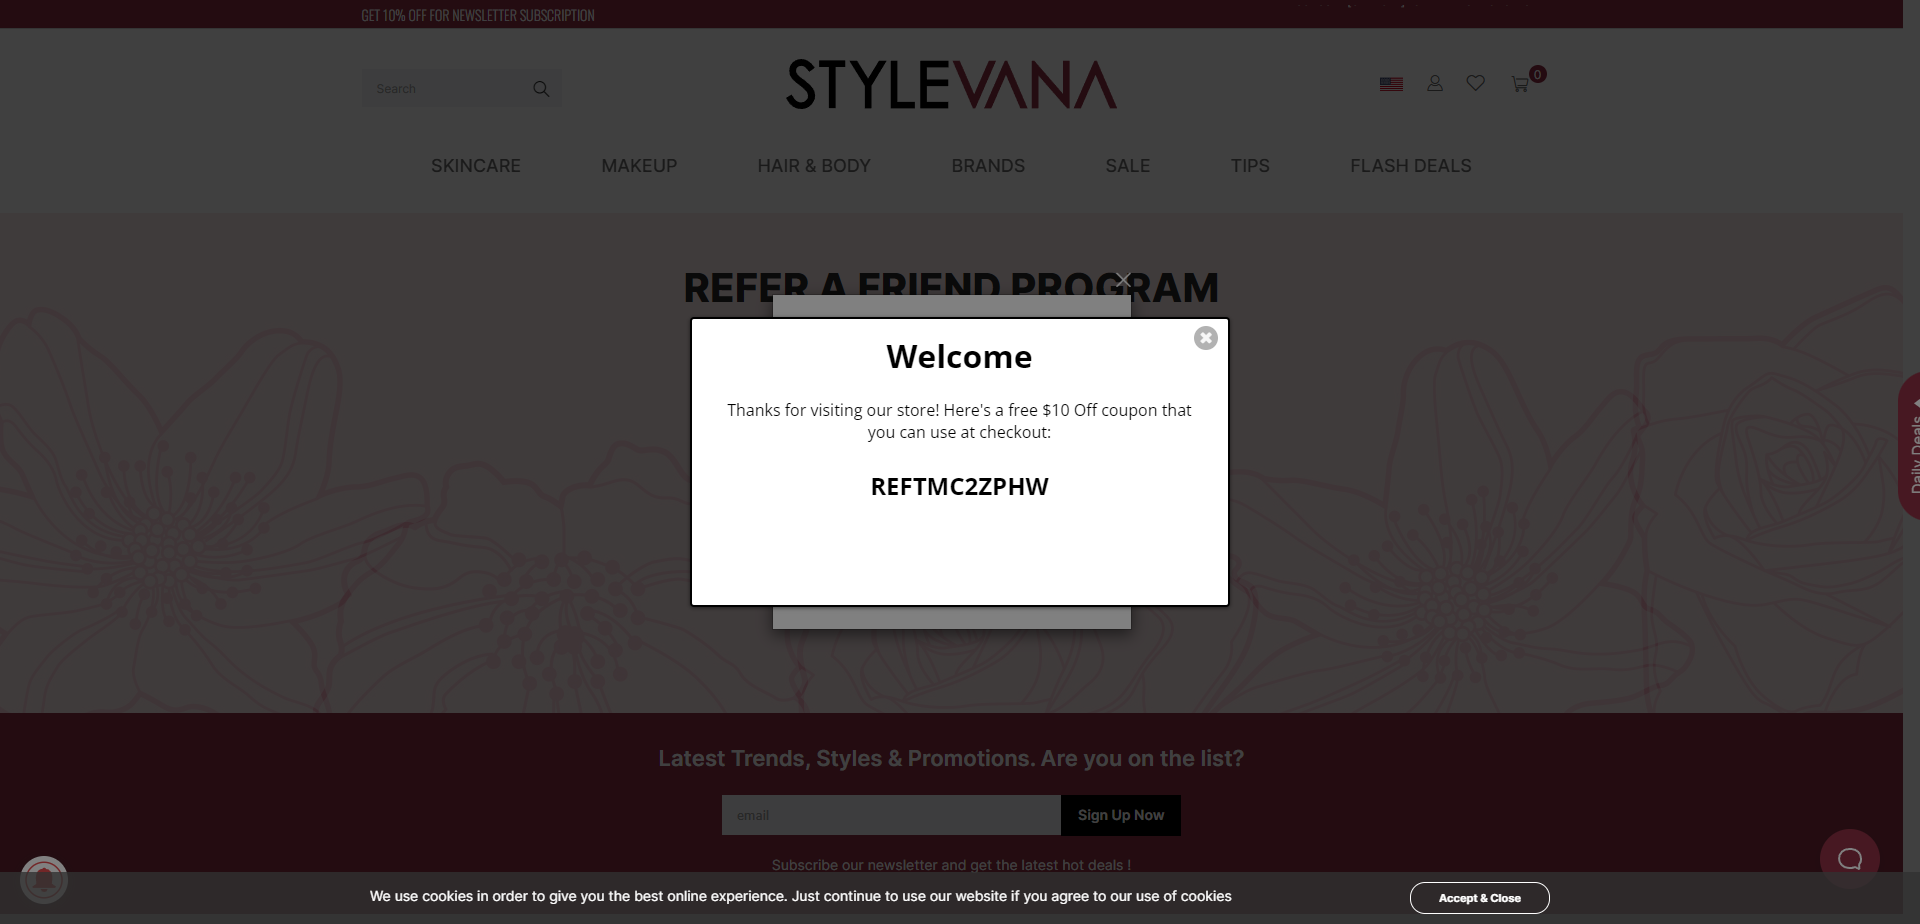 Referral Landing Page for Stylevana